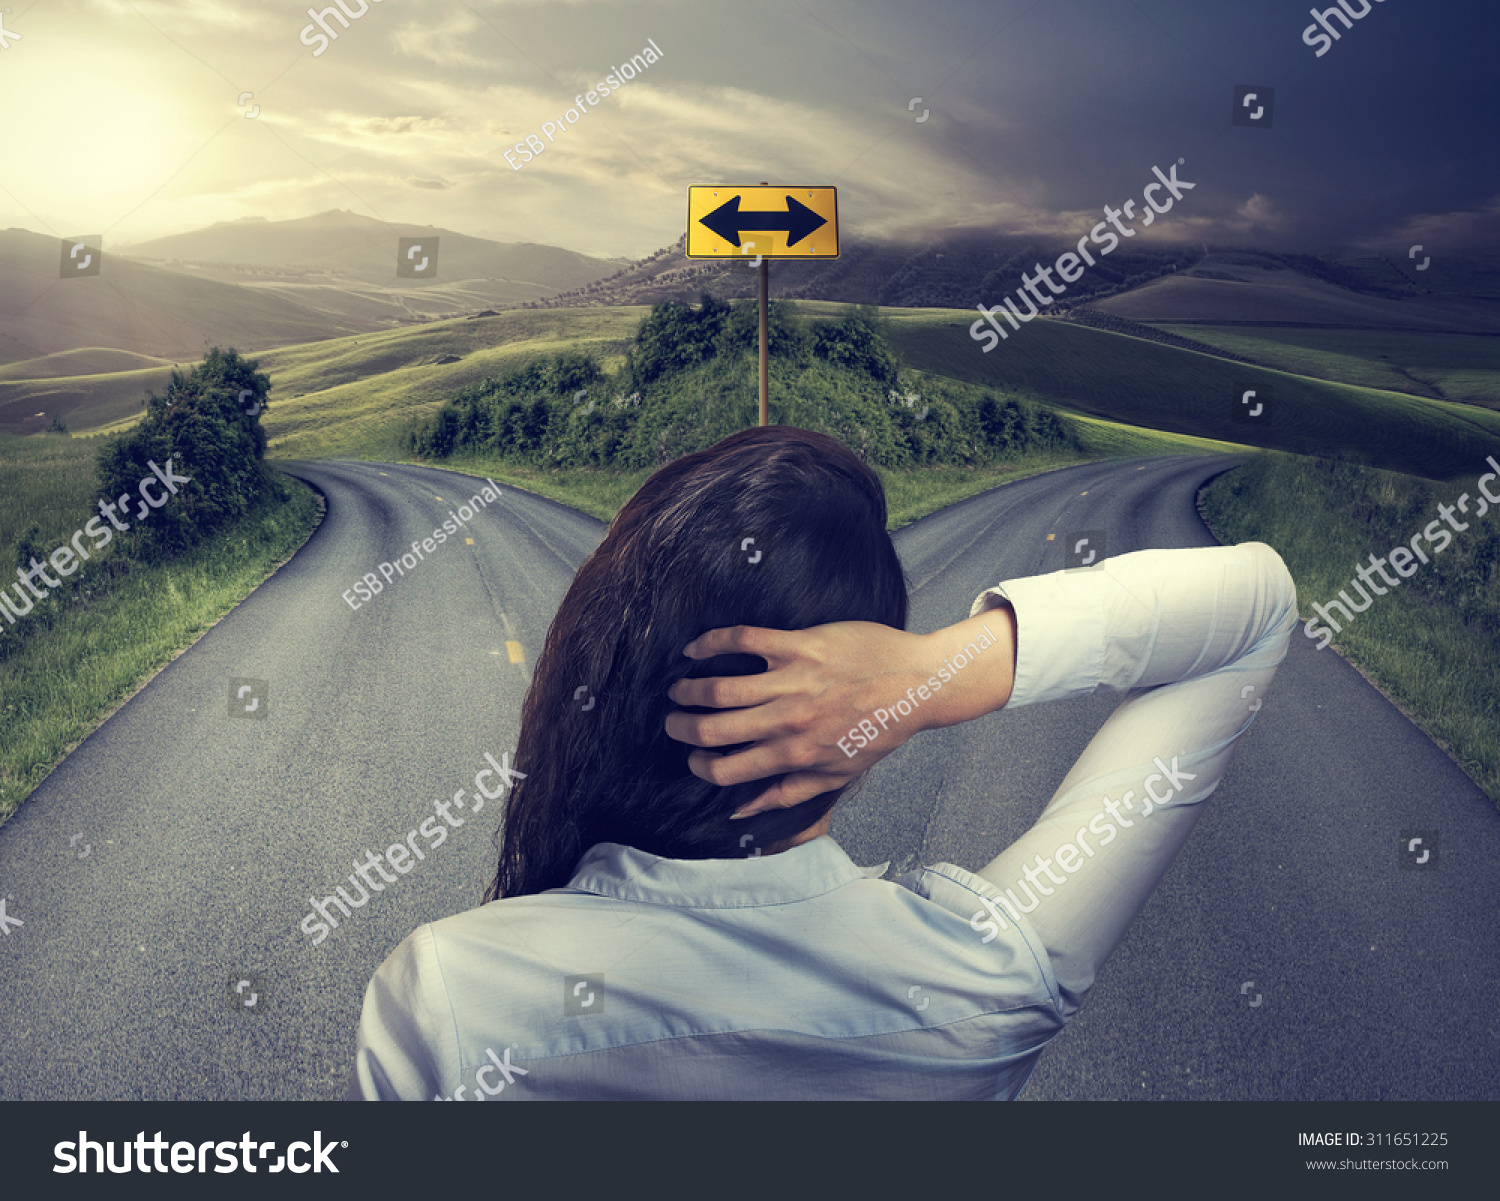 business woman in front of two roads thinking deciding hoping for best taking chance #311651225